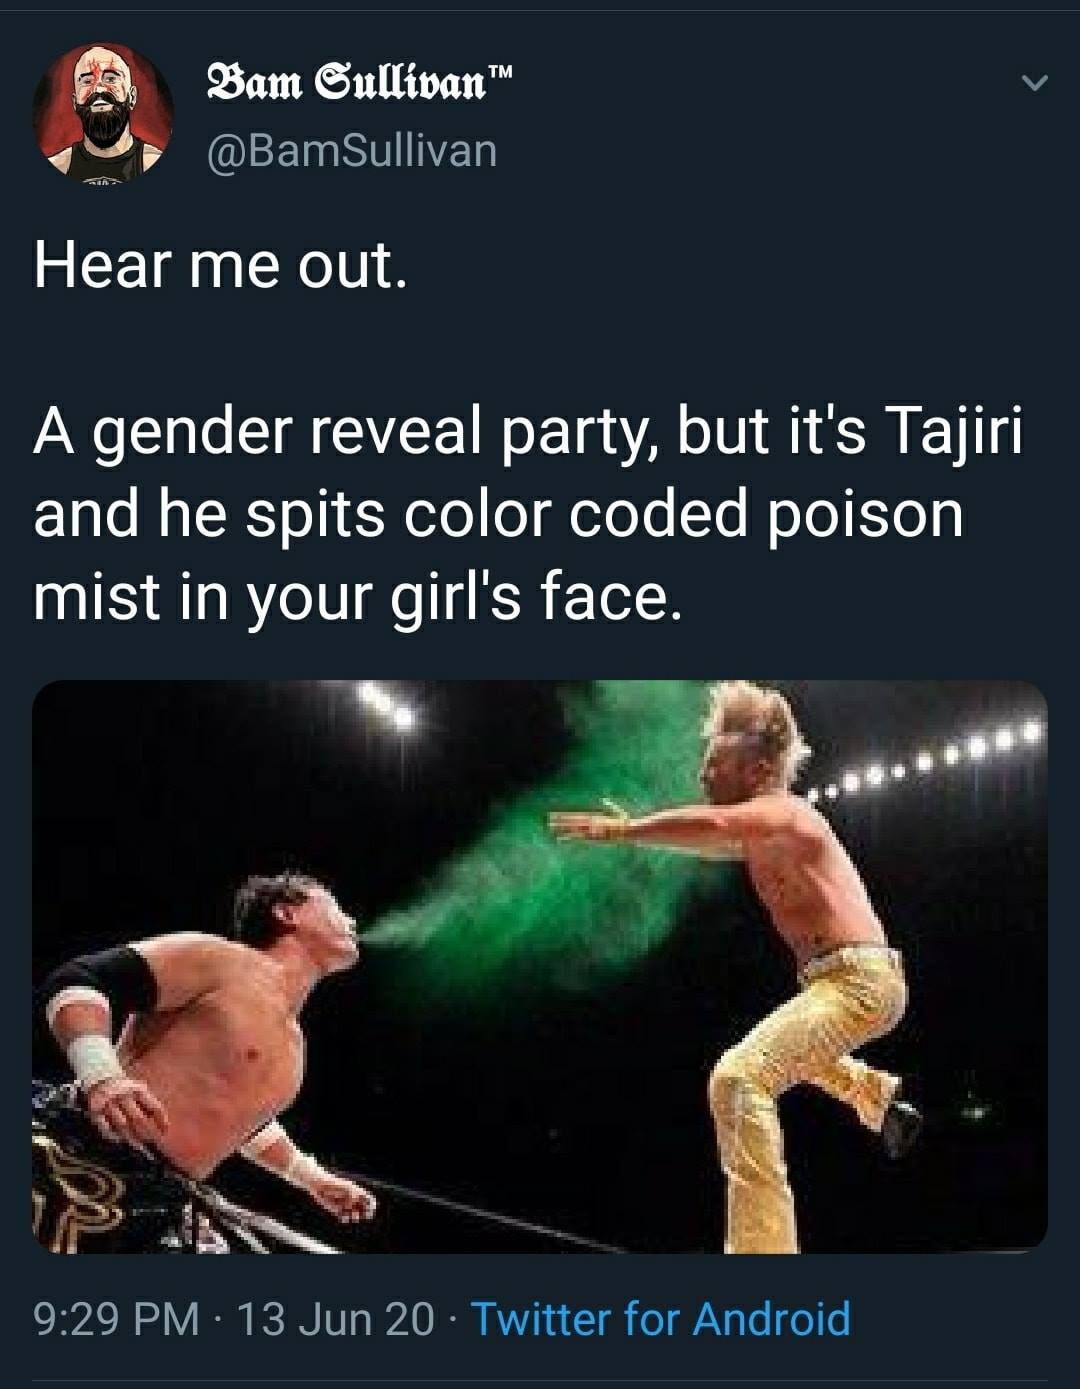 WWE wrestling memes - mist tajiri spit - Bam Sullivan Hear me out. A gender reveal party, but it's Tajiri and he spits color coded poison mist in your girl's face. 13 Jun 20 Twitter for Android